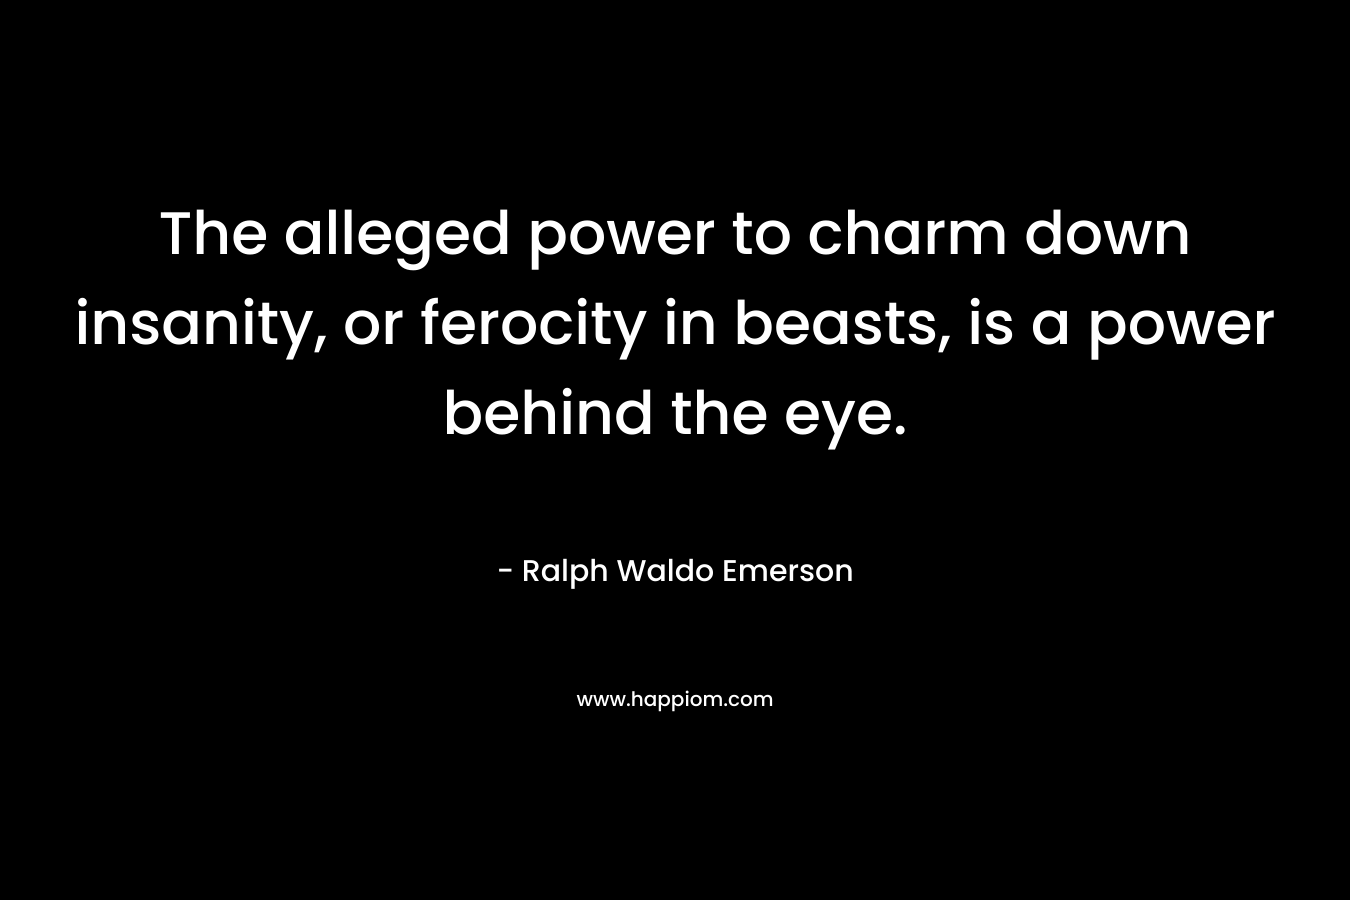 The alleged power to charm down insanity, or ferocity in beasts, is a power behind the eye.